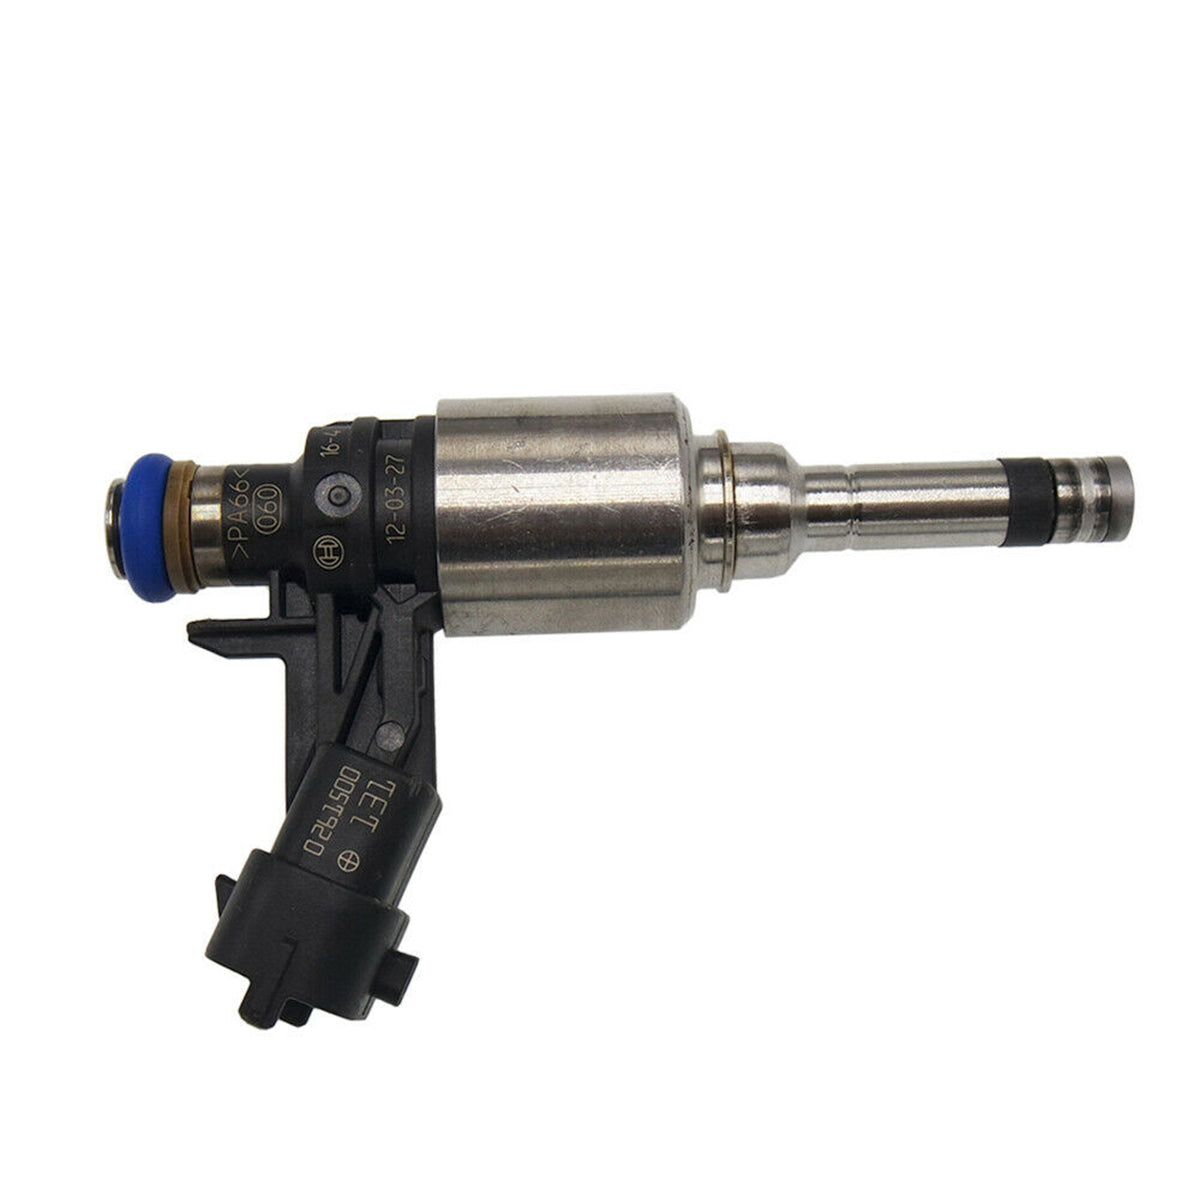 Fuel Injector For 2012-2017 Buick Enclave Chevy Traverse GMC Acadia, Fuel Injector 12663380, Car Fuel Injector, Daysyore Fuel Injector